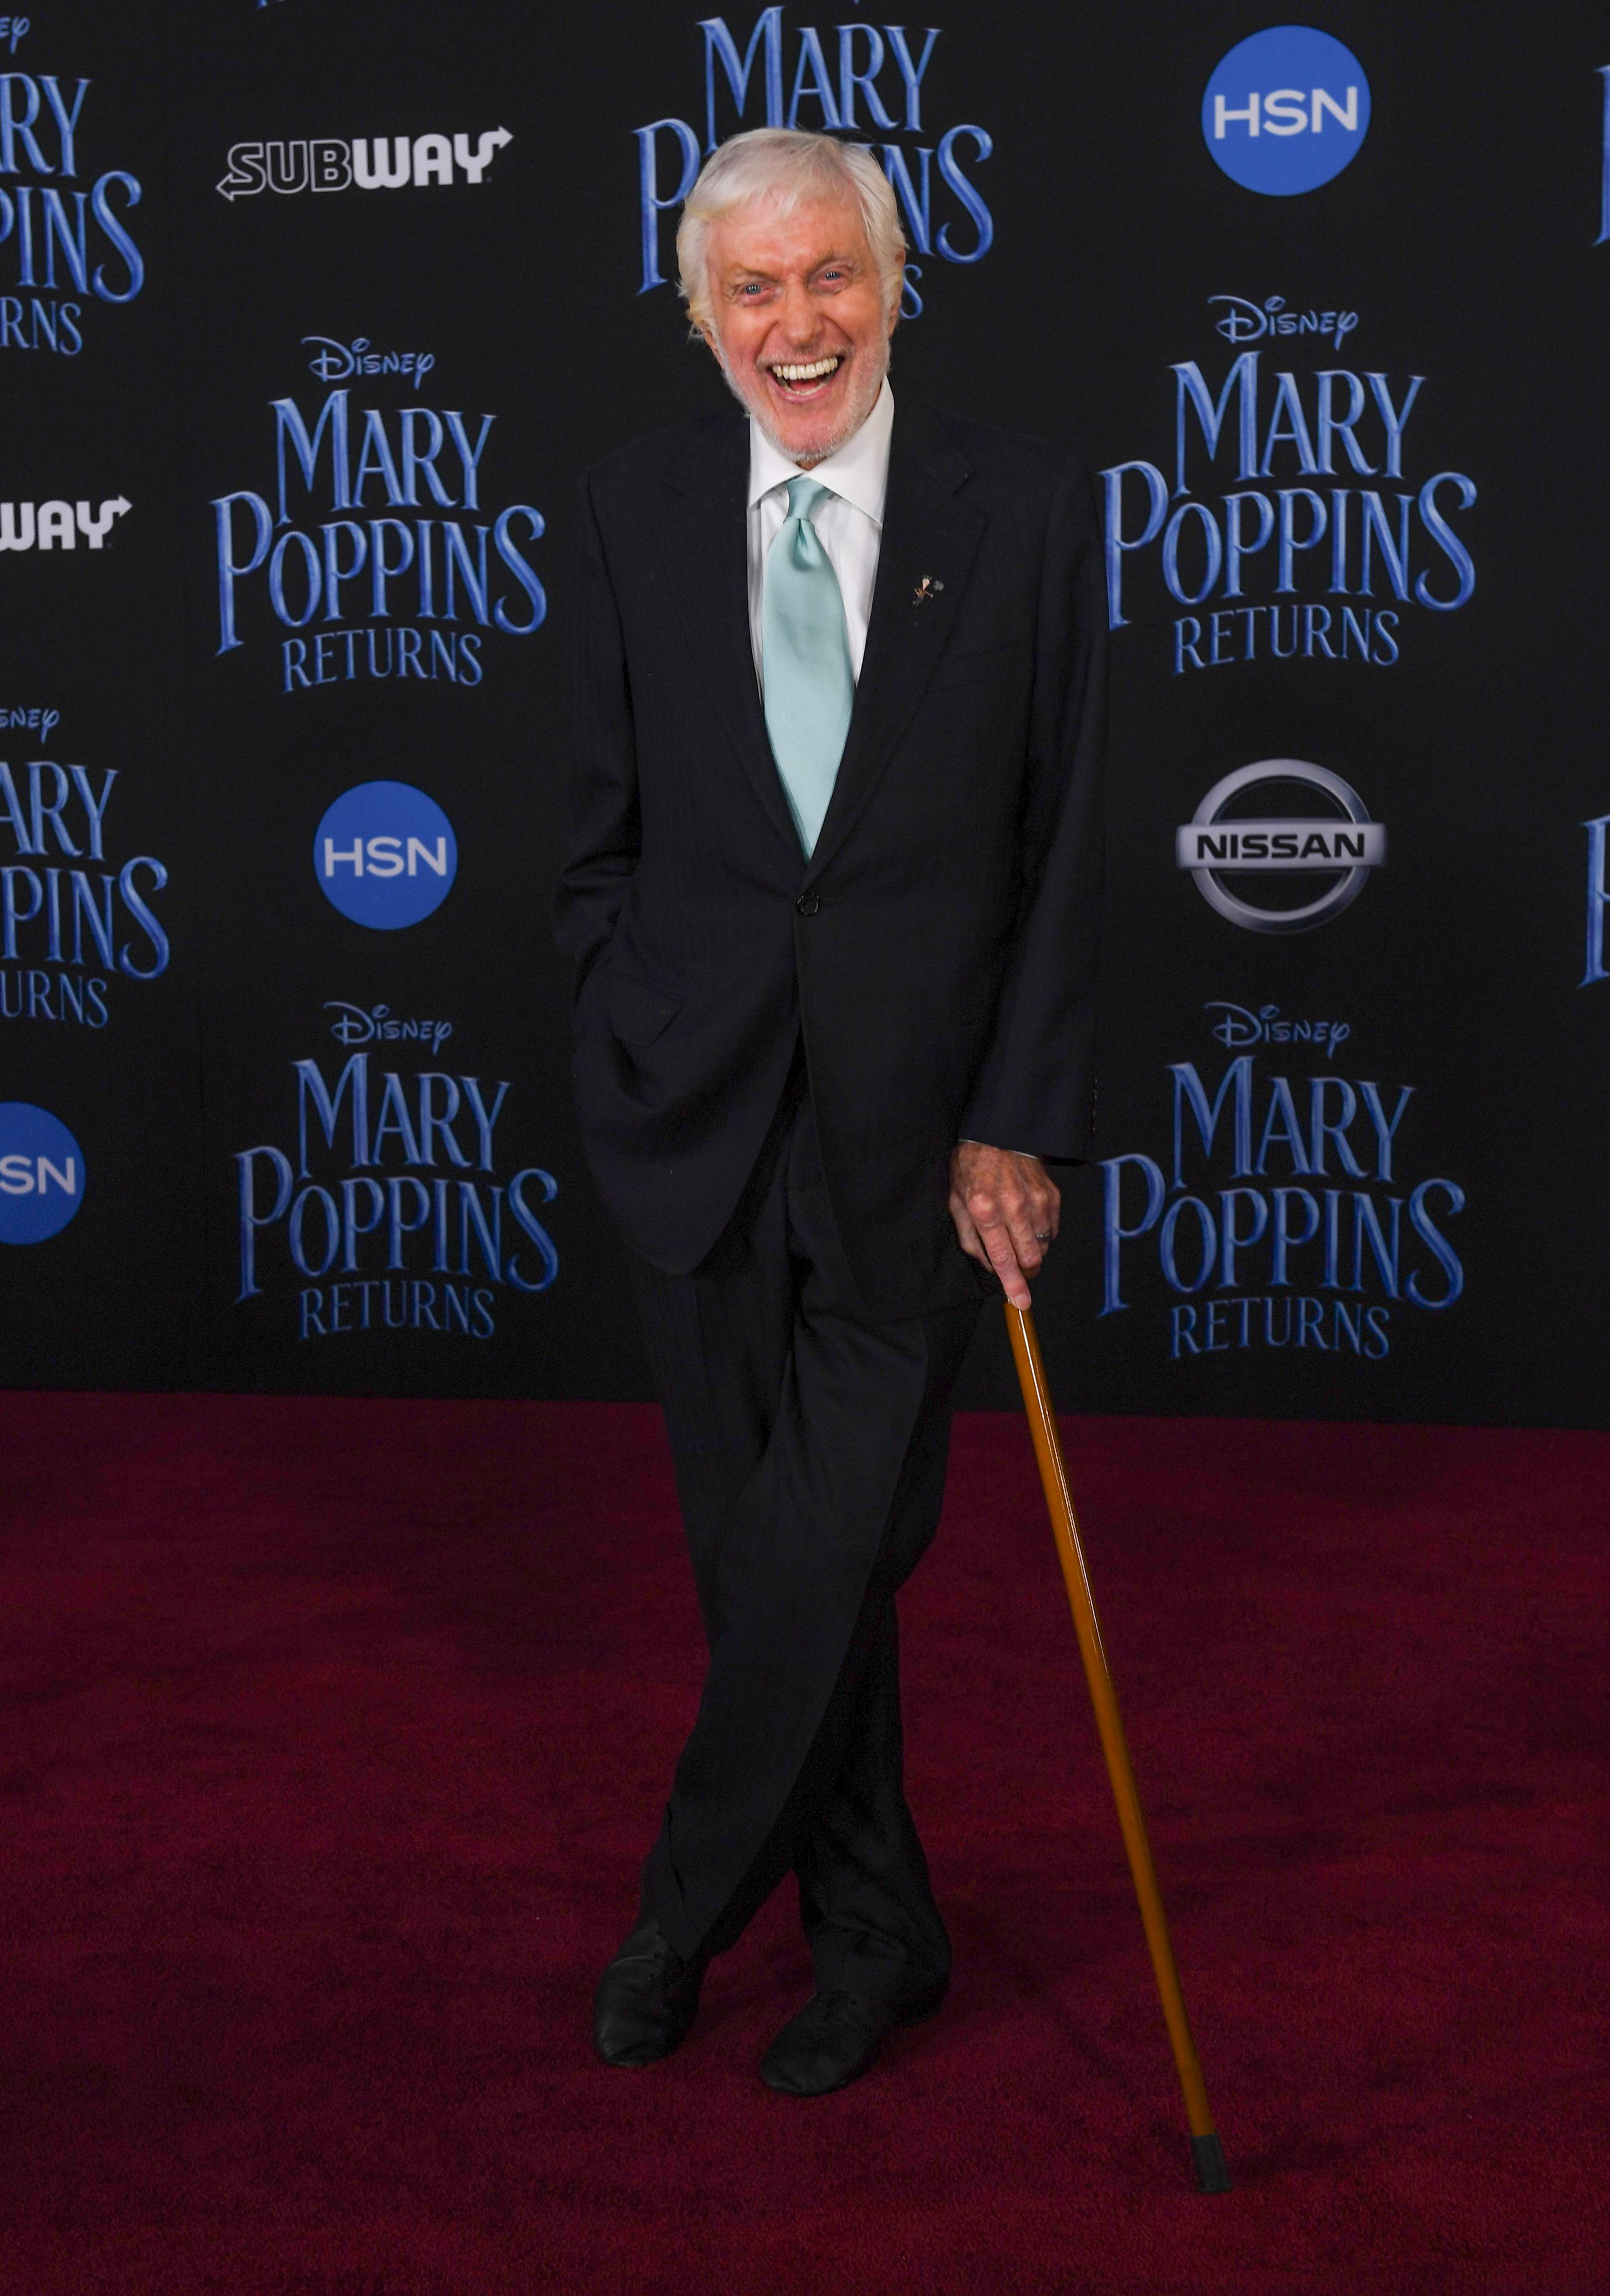 Dick was most known for his roles in Mary Poppins, Chitty Chitty Bang Bang, and The Dick Van Dyke Show